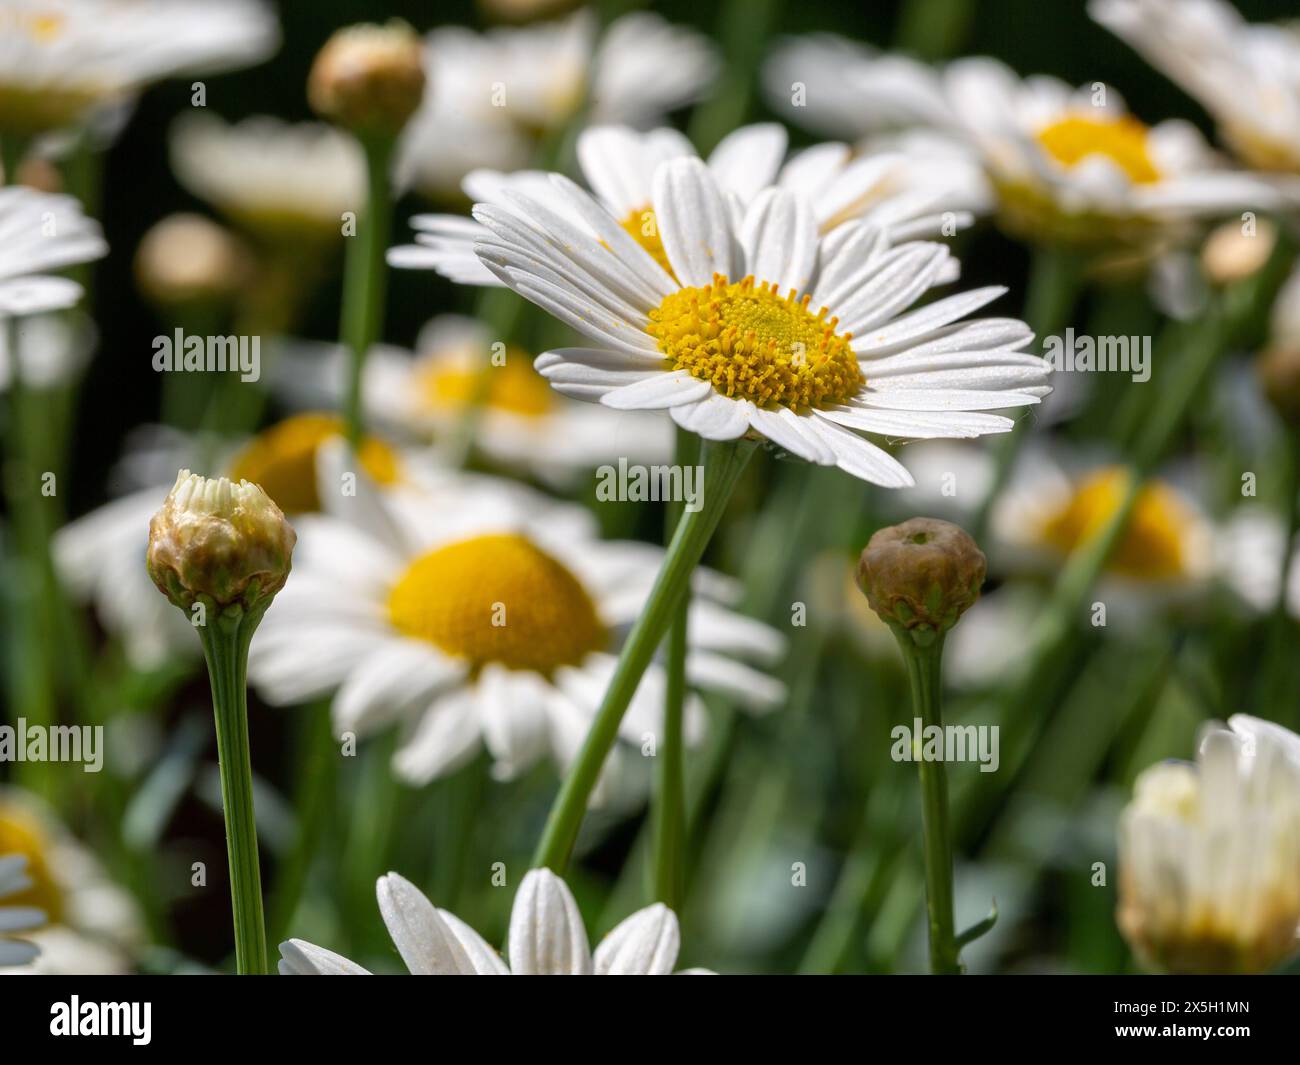 Close-up of a wild daisy flower (Leucanthemum vulgare), white chamomile with others in a blurred background. Stock Photo